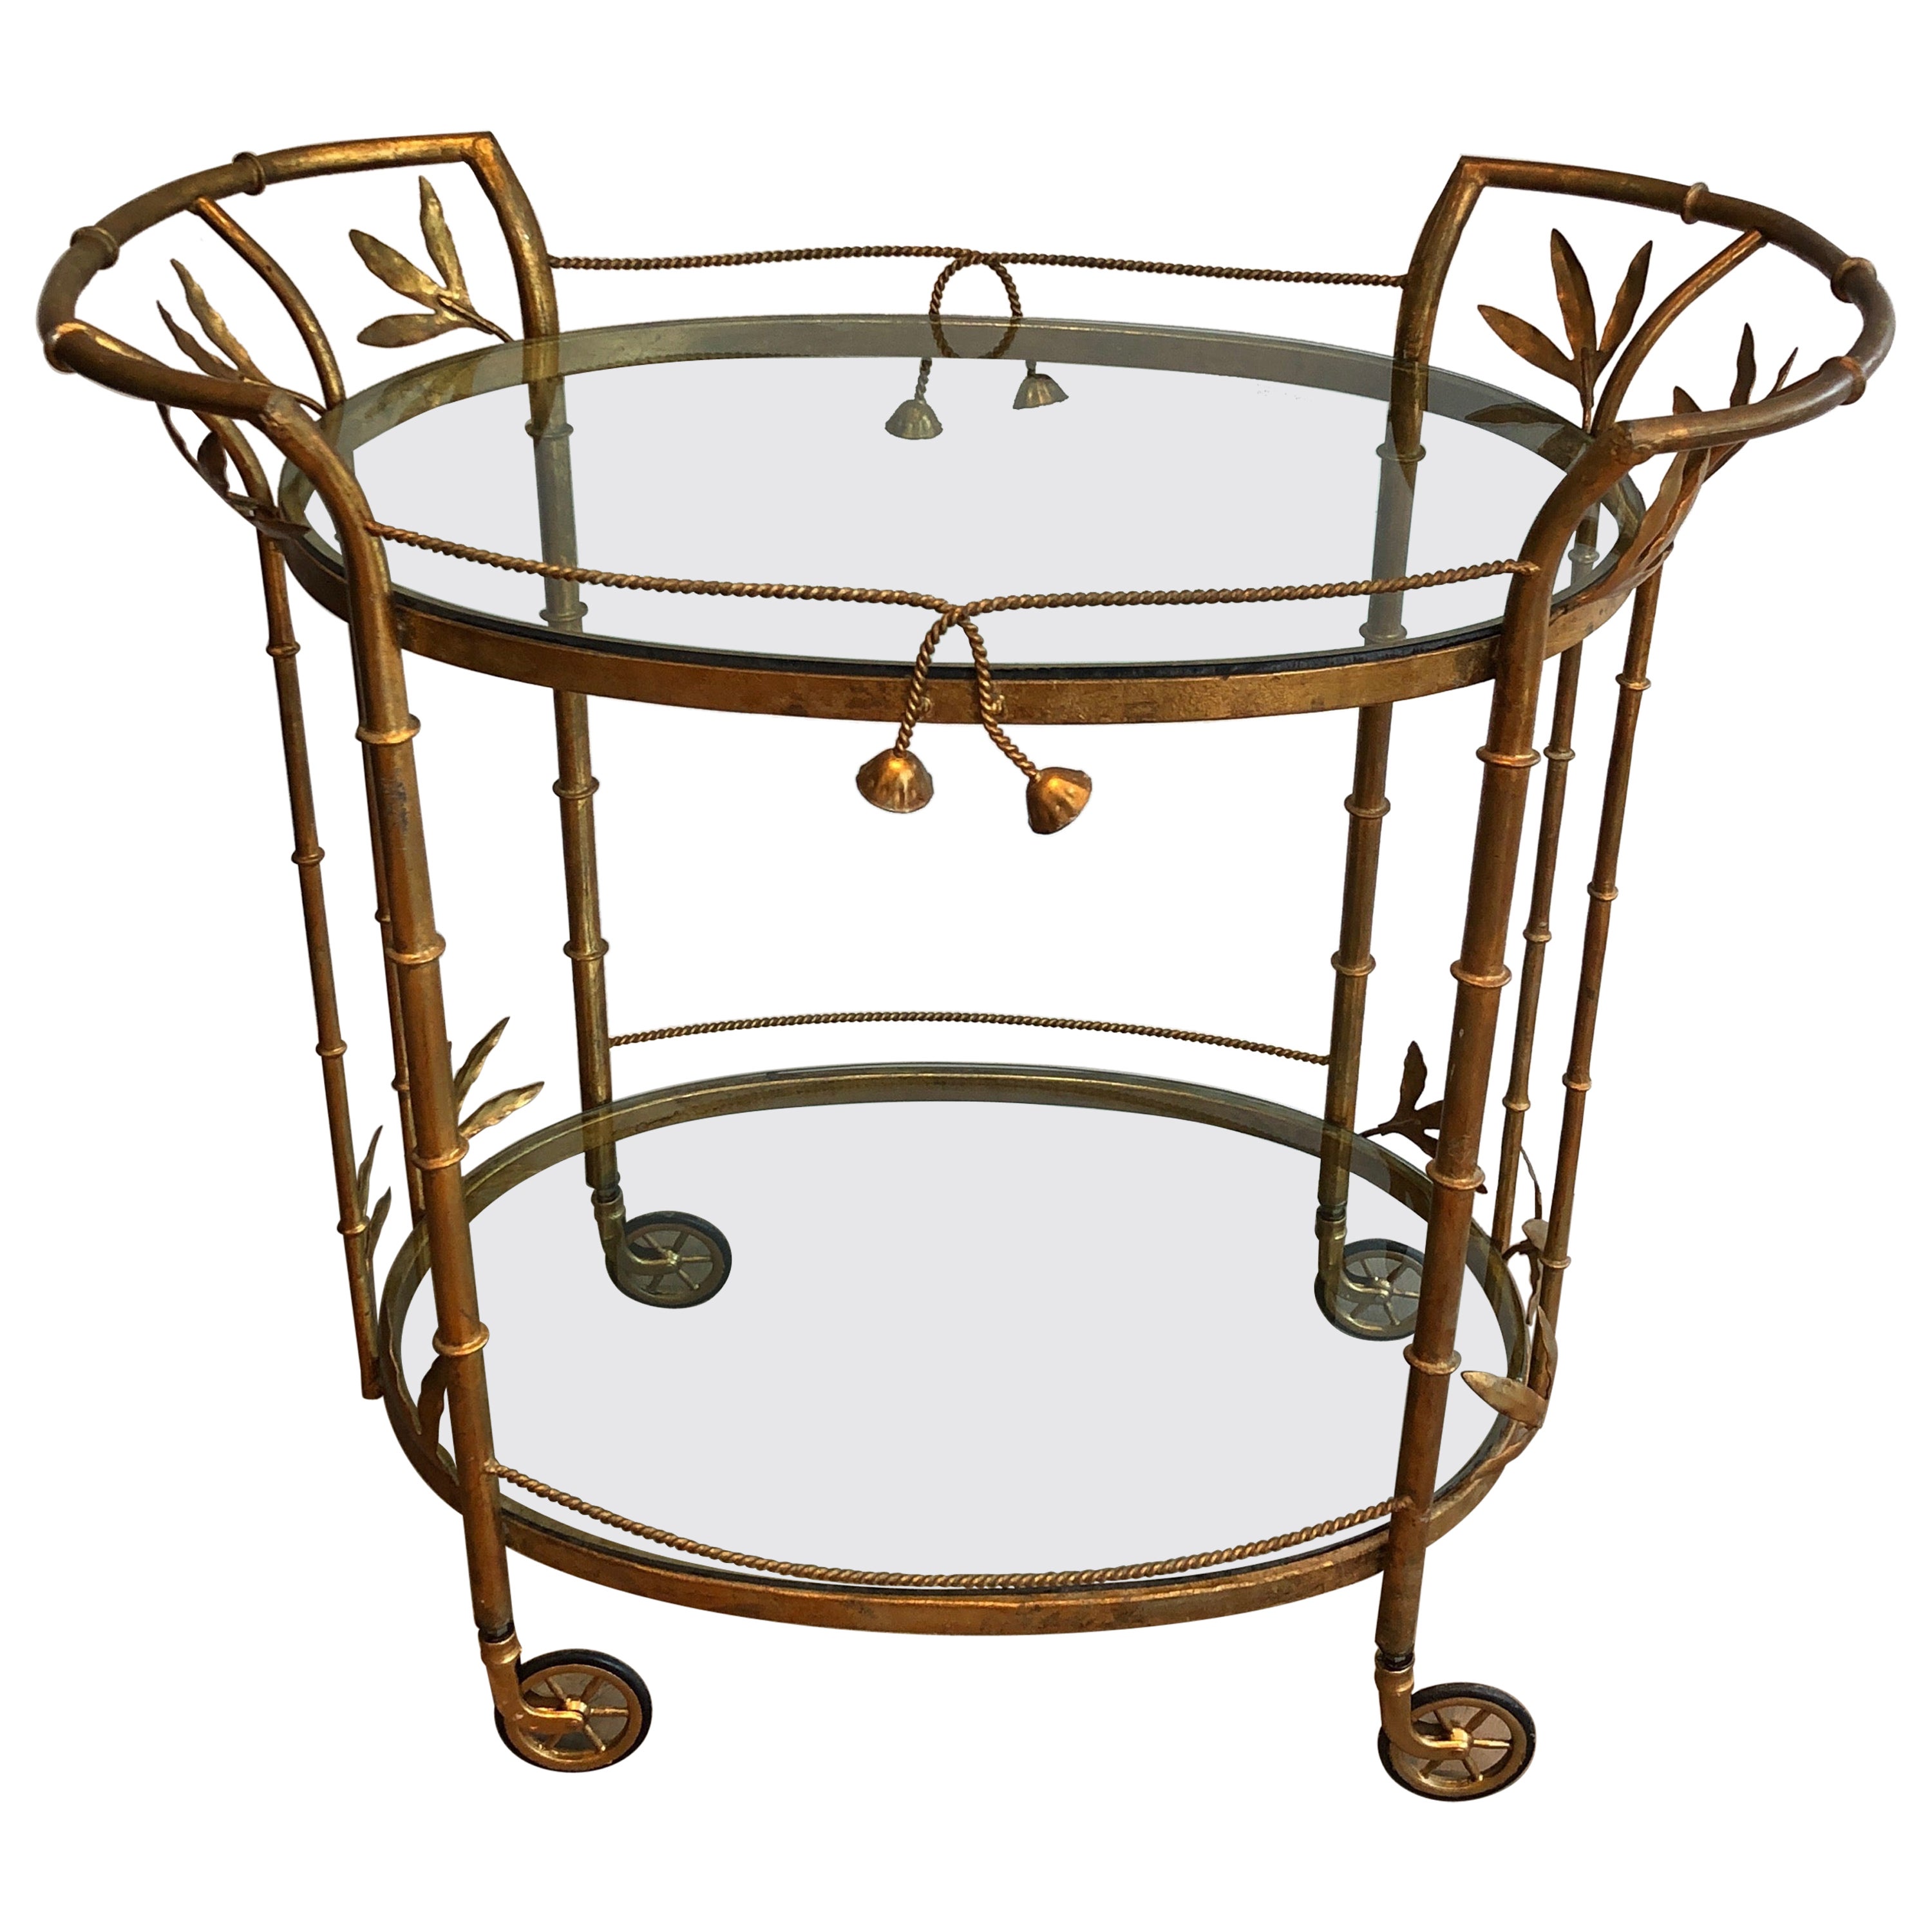 Faux-Bamboo Gilt Metal Drinks Trolley. French work Attributed to Coco Chanel. 